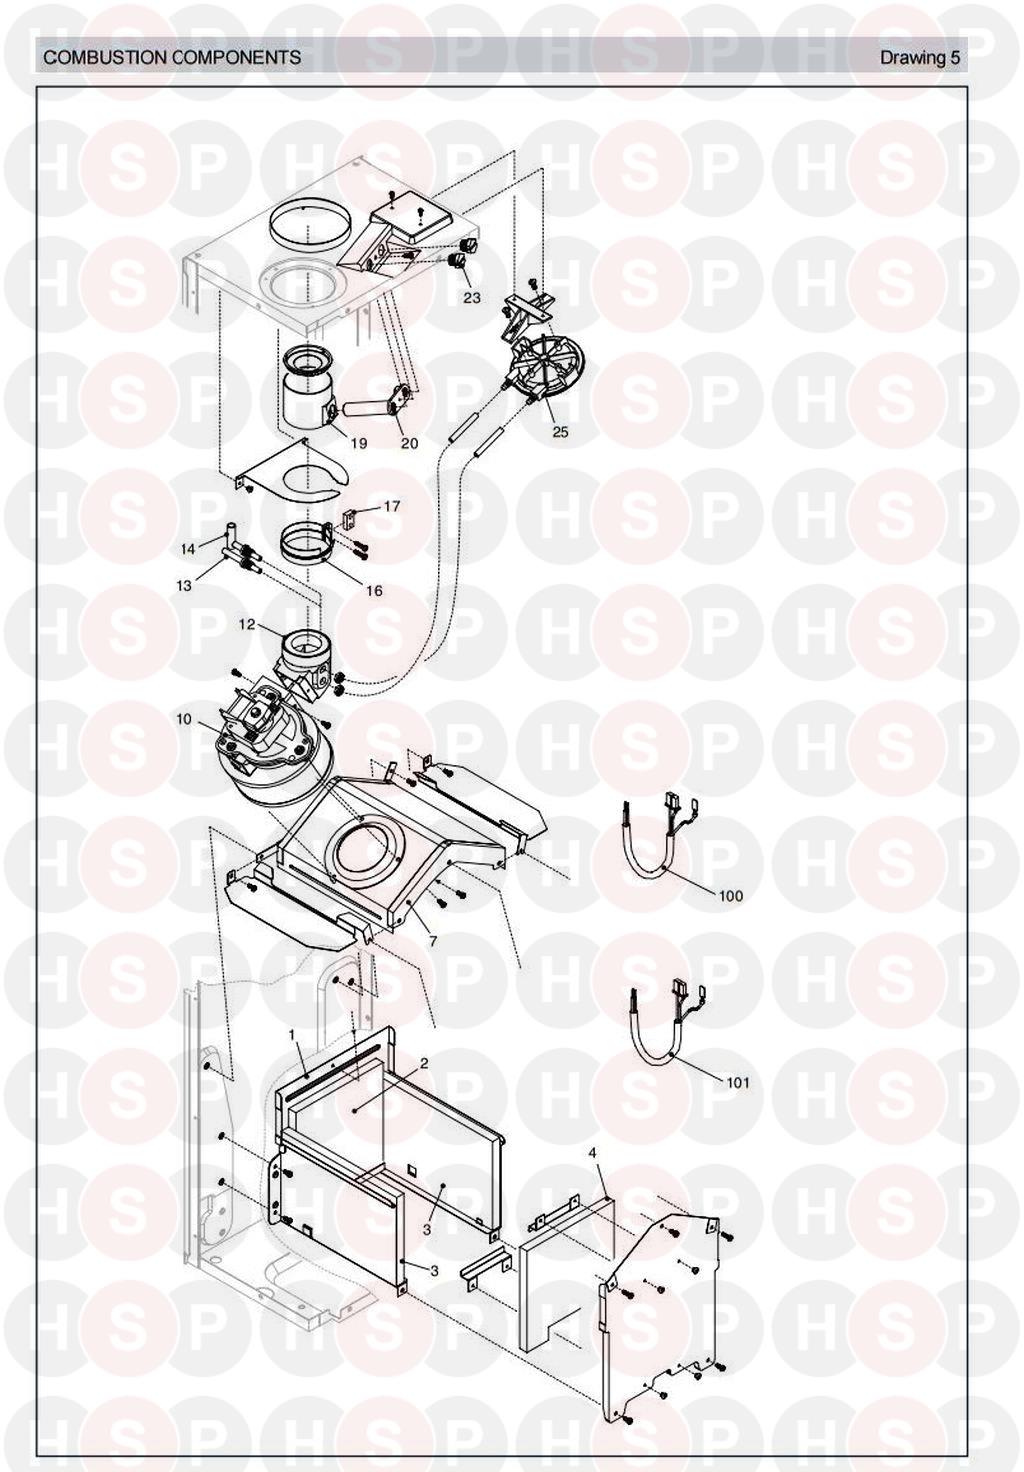 Combustion Chamber diagram for Vokera Mynute 20 E Rev 4 (02/08)